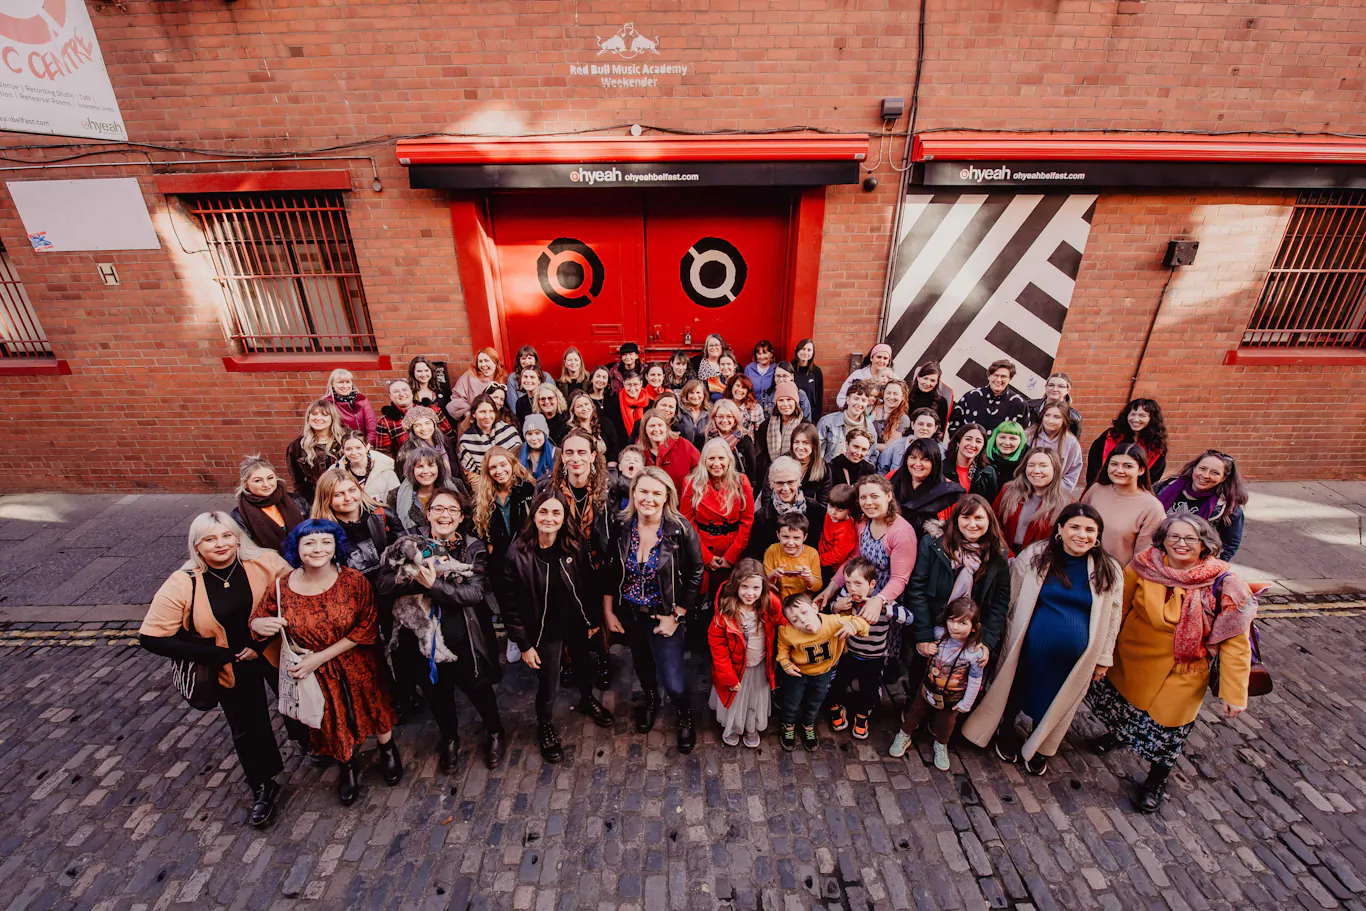 The Oh Yeah Music Centre, Belfast announces Women’s Work Festival 2022 from 2nd – 5th June 